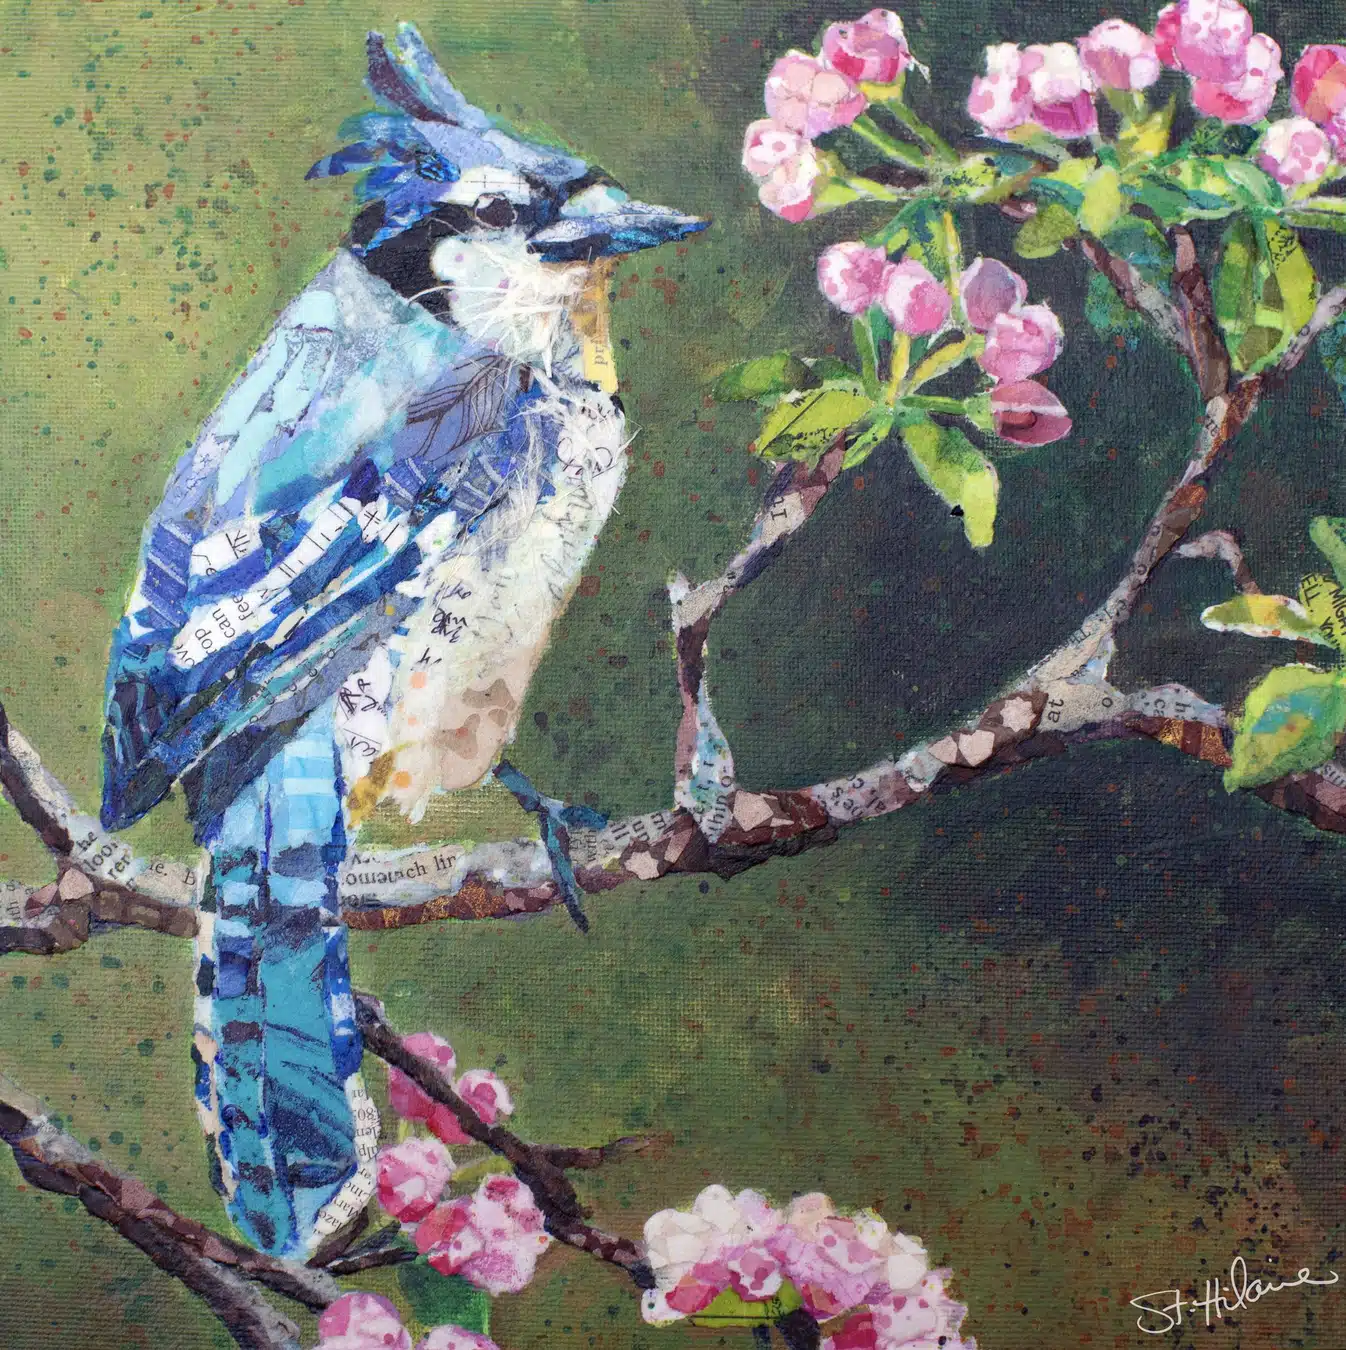 “Blue Jay on Apple Blossoms” by Elizabeth St. Hilaire